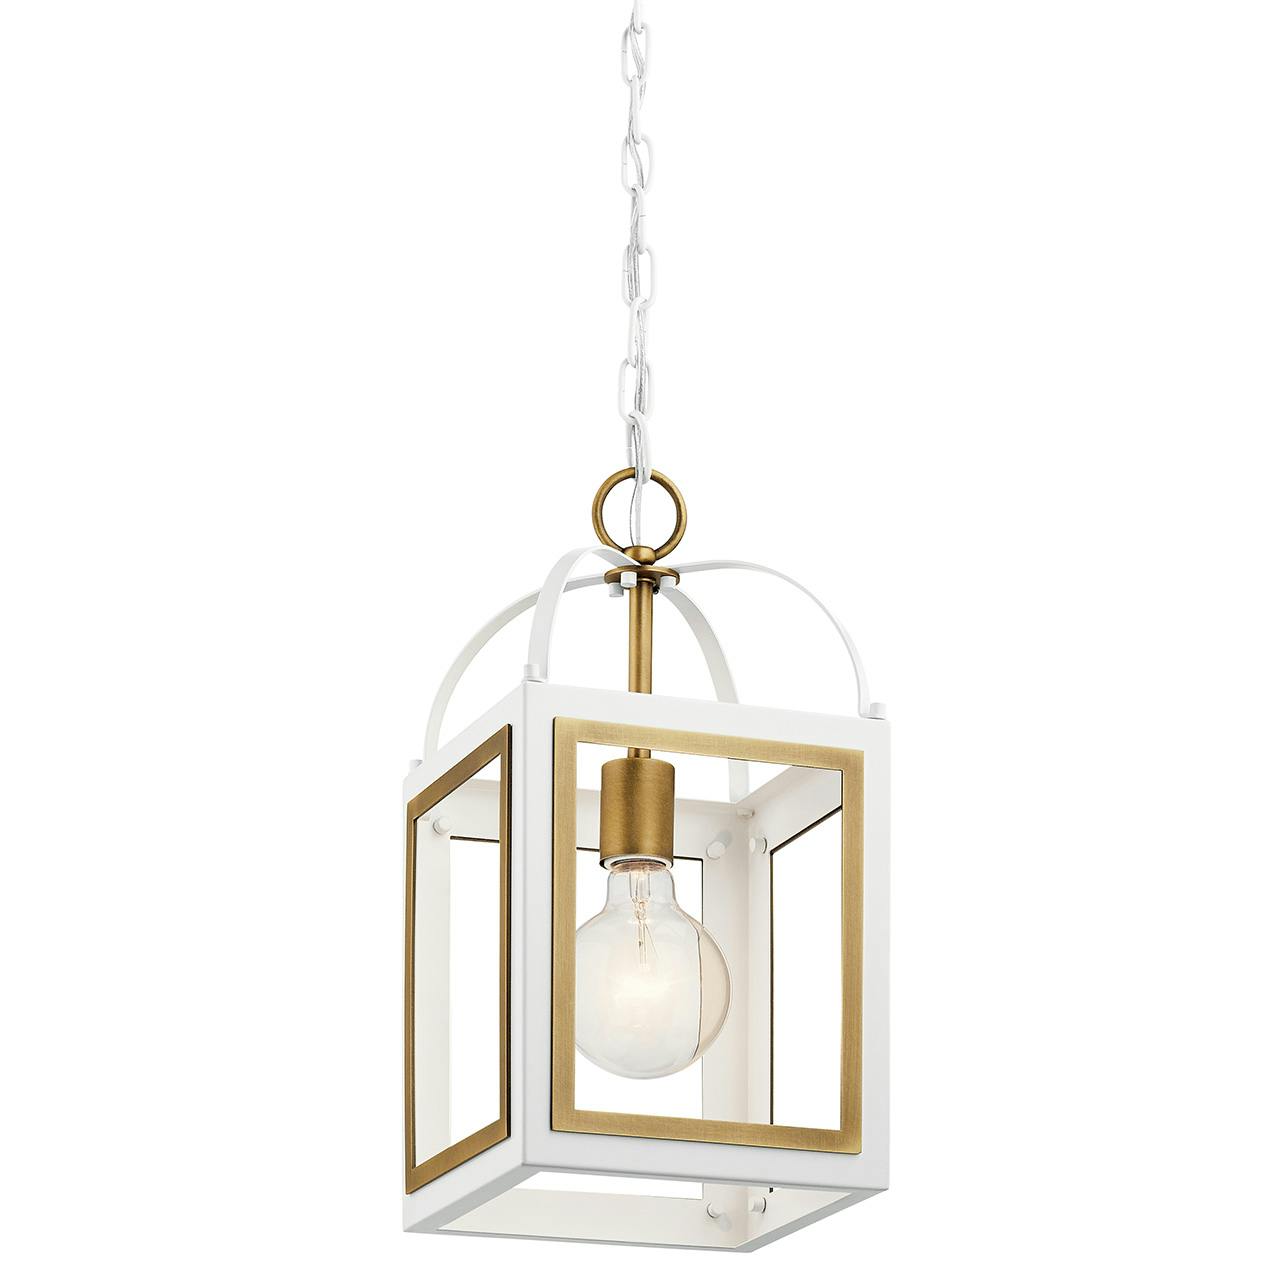 Vath 8" 1 Light Foyer White & Brass without the canopy on a white background